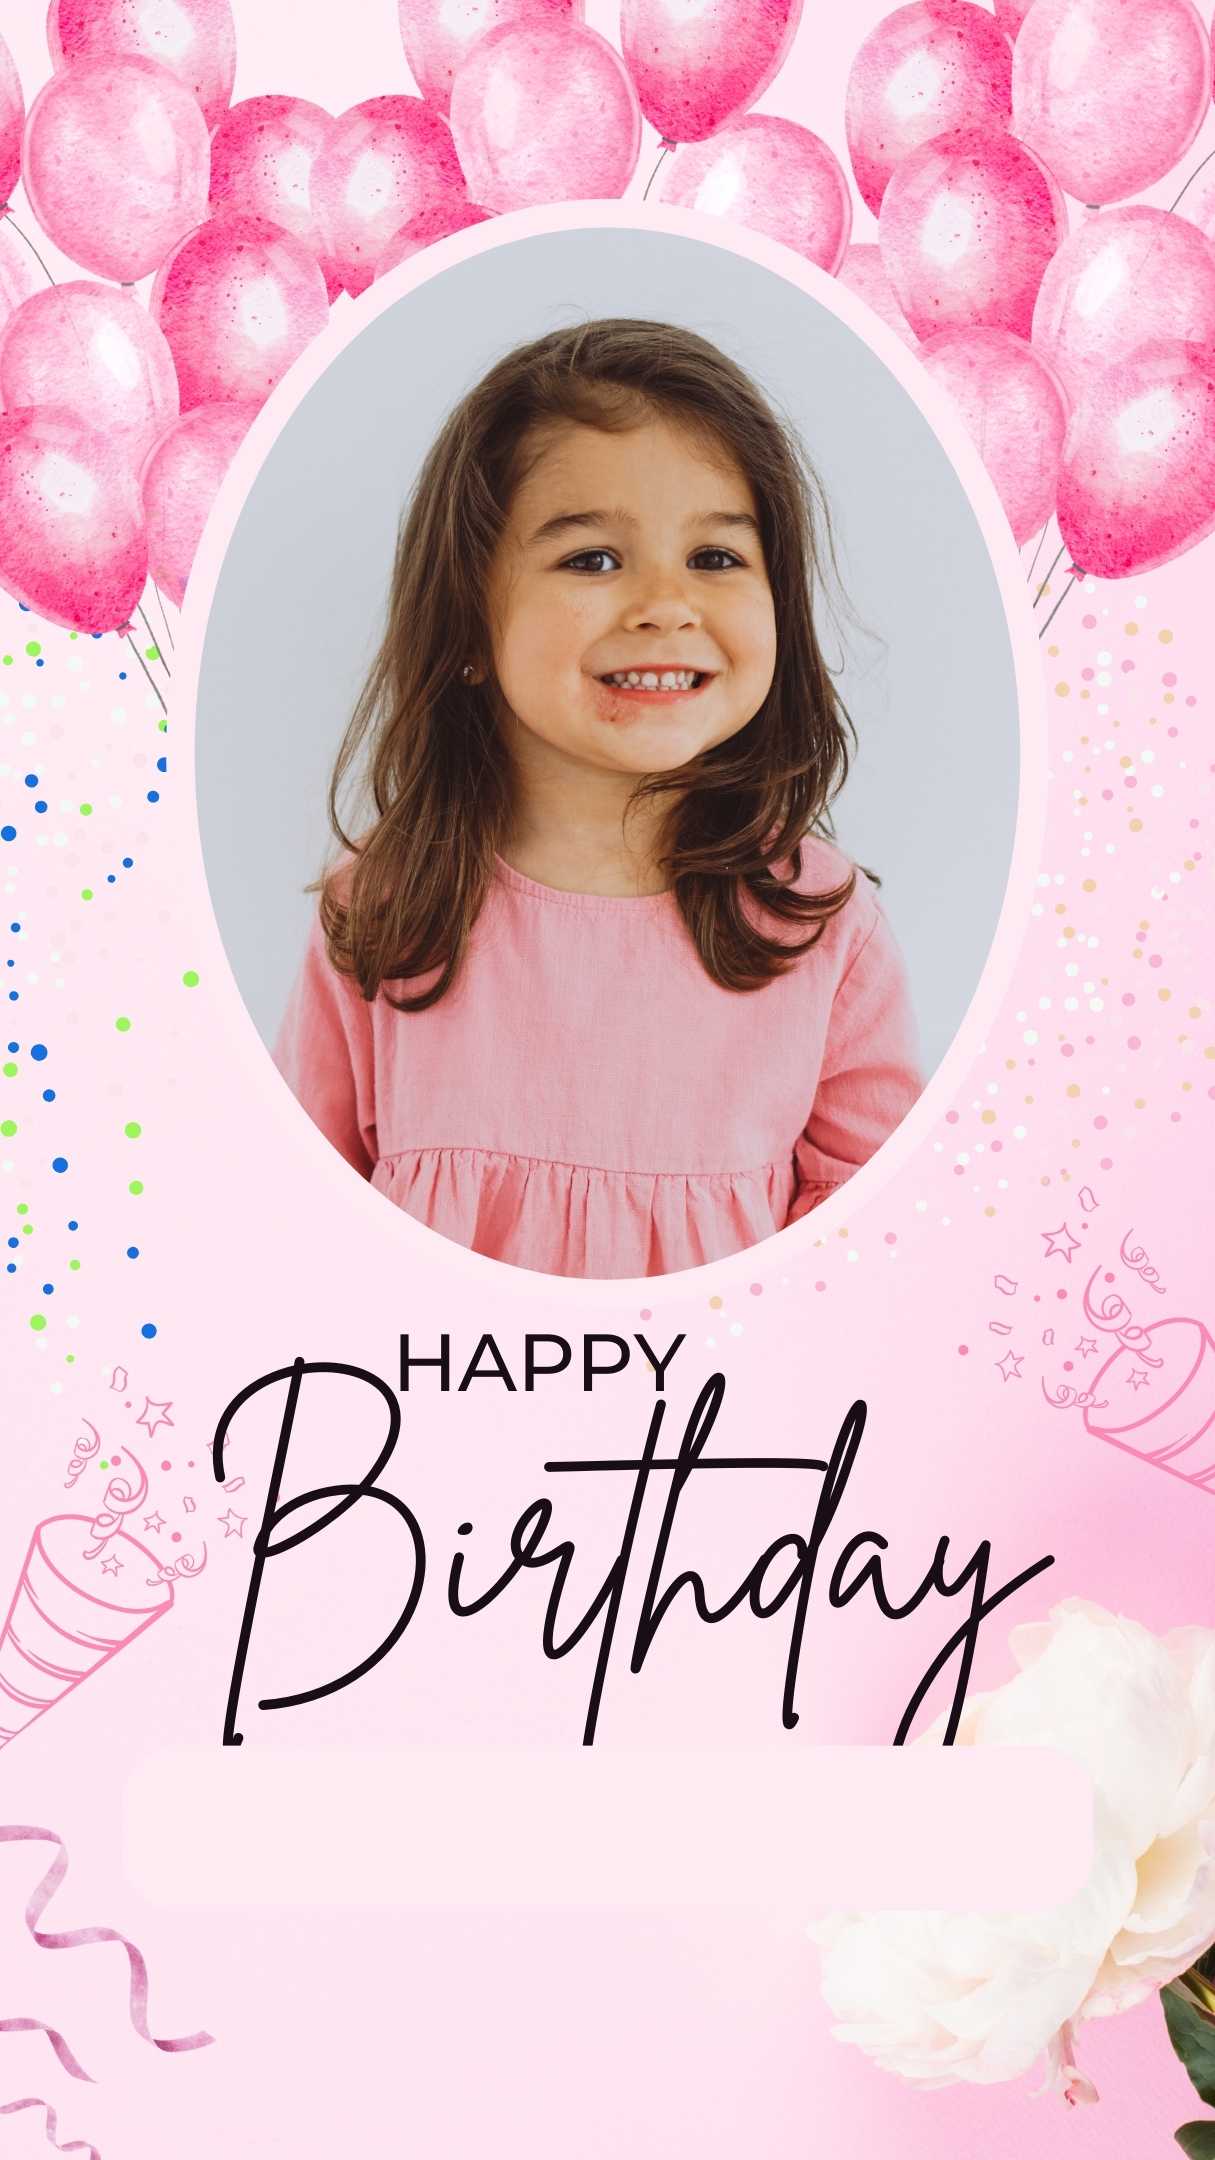 Happy 1st Birthday Girl Wish Tips Make Her Day Magical_tipsforfits.com